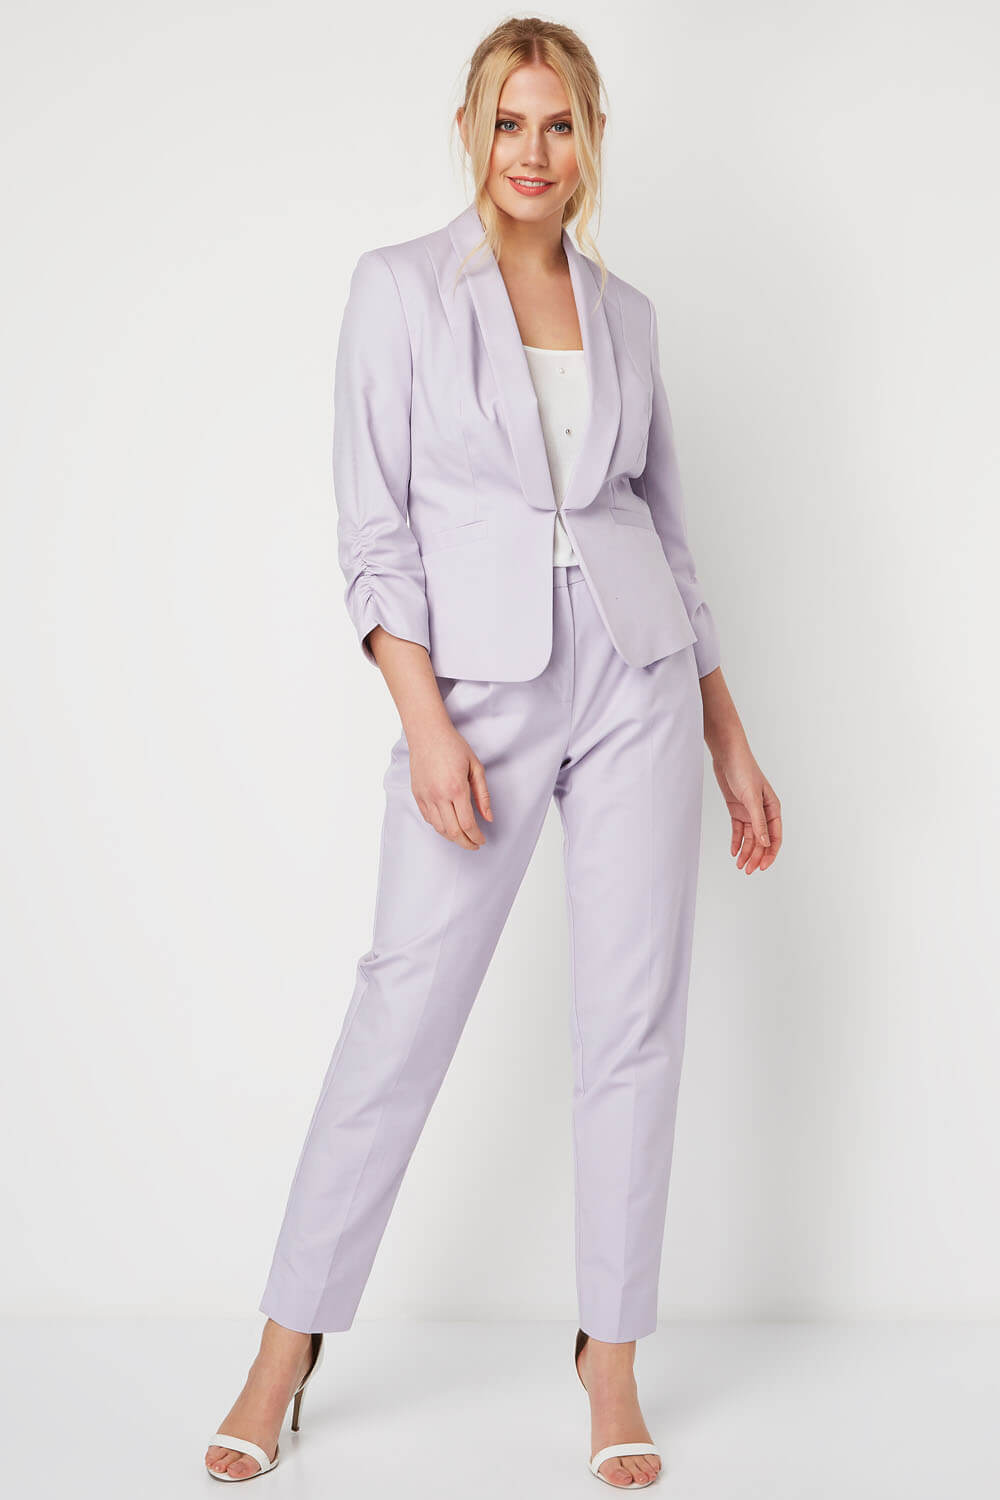 Lilac Ruched 3/4 Sleeve Jacket, Image 3 of 5